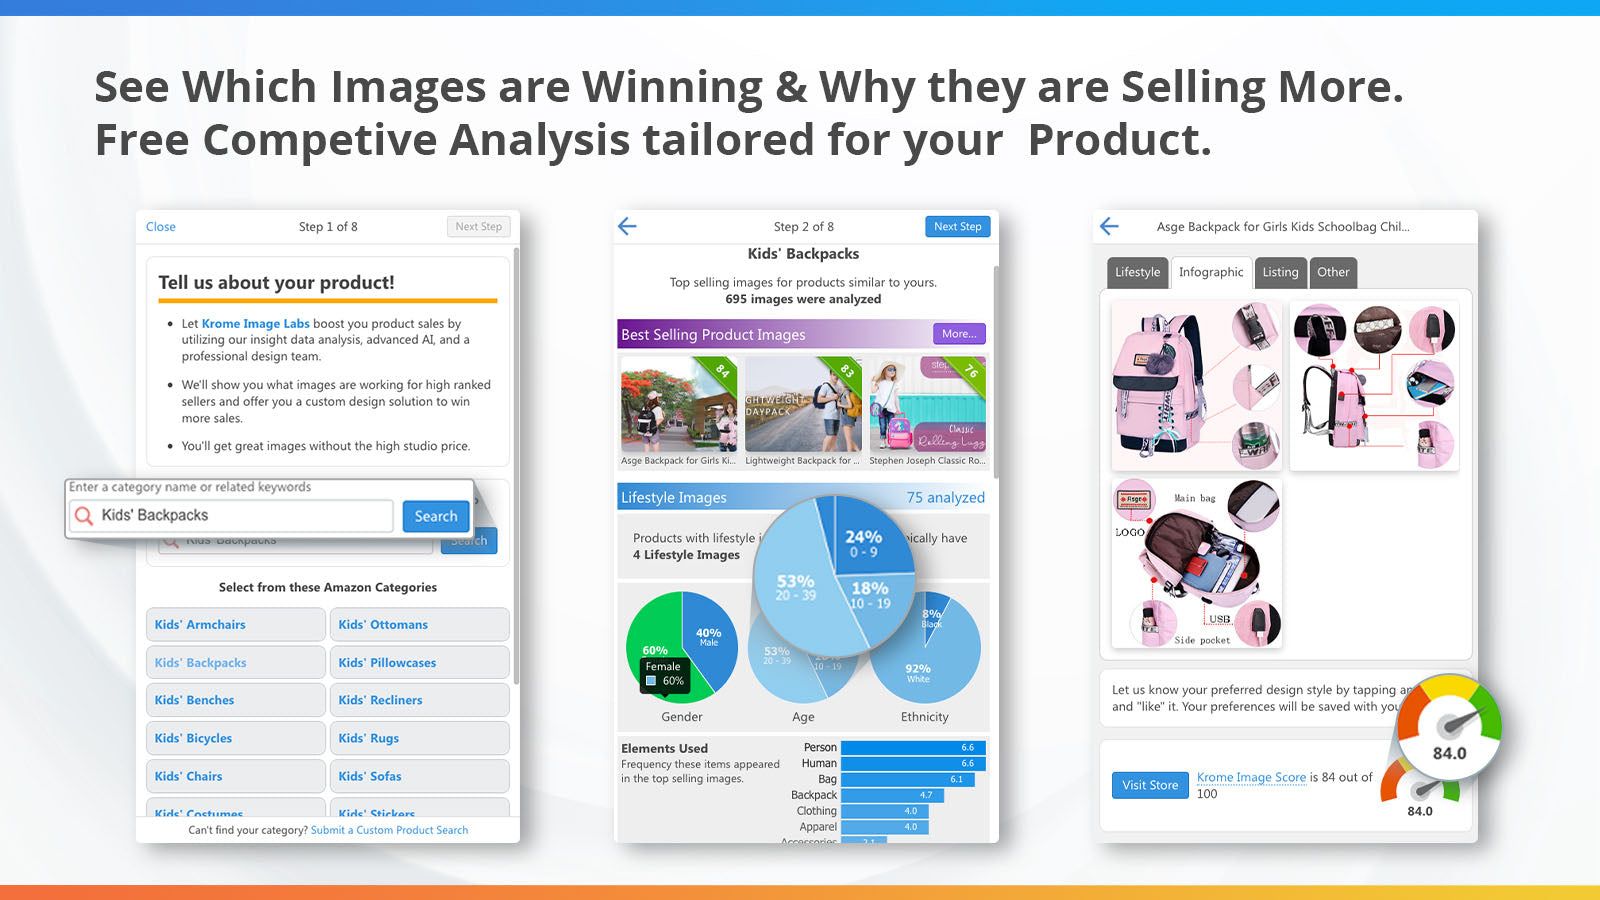 See Which Images are Winning & Why they are selling more - Free